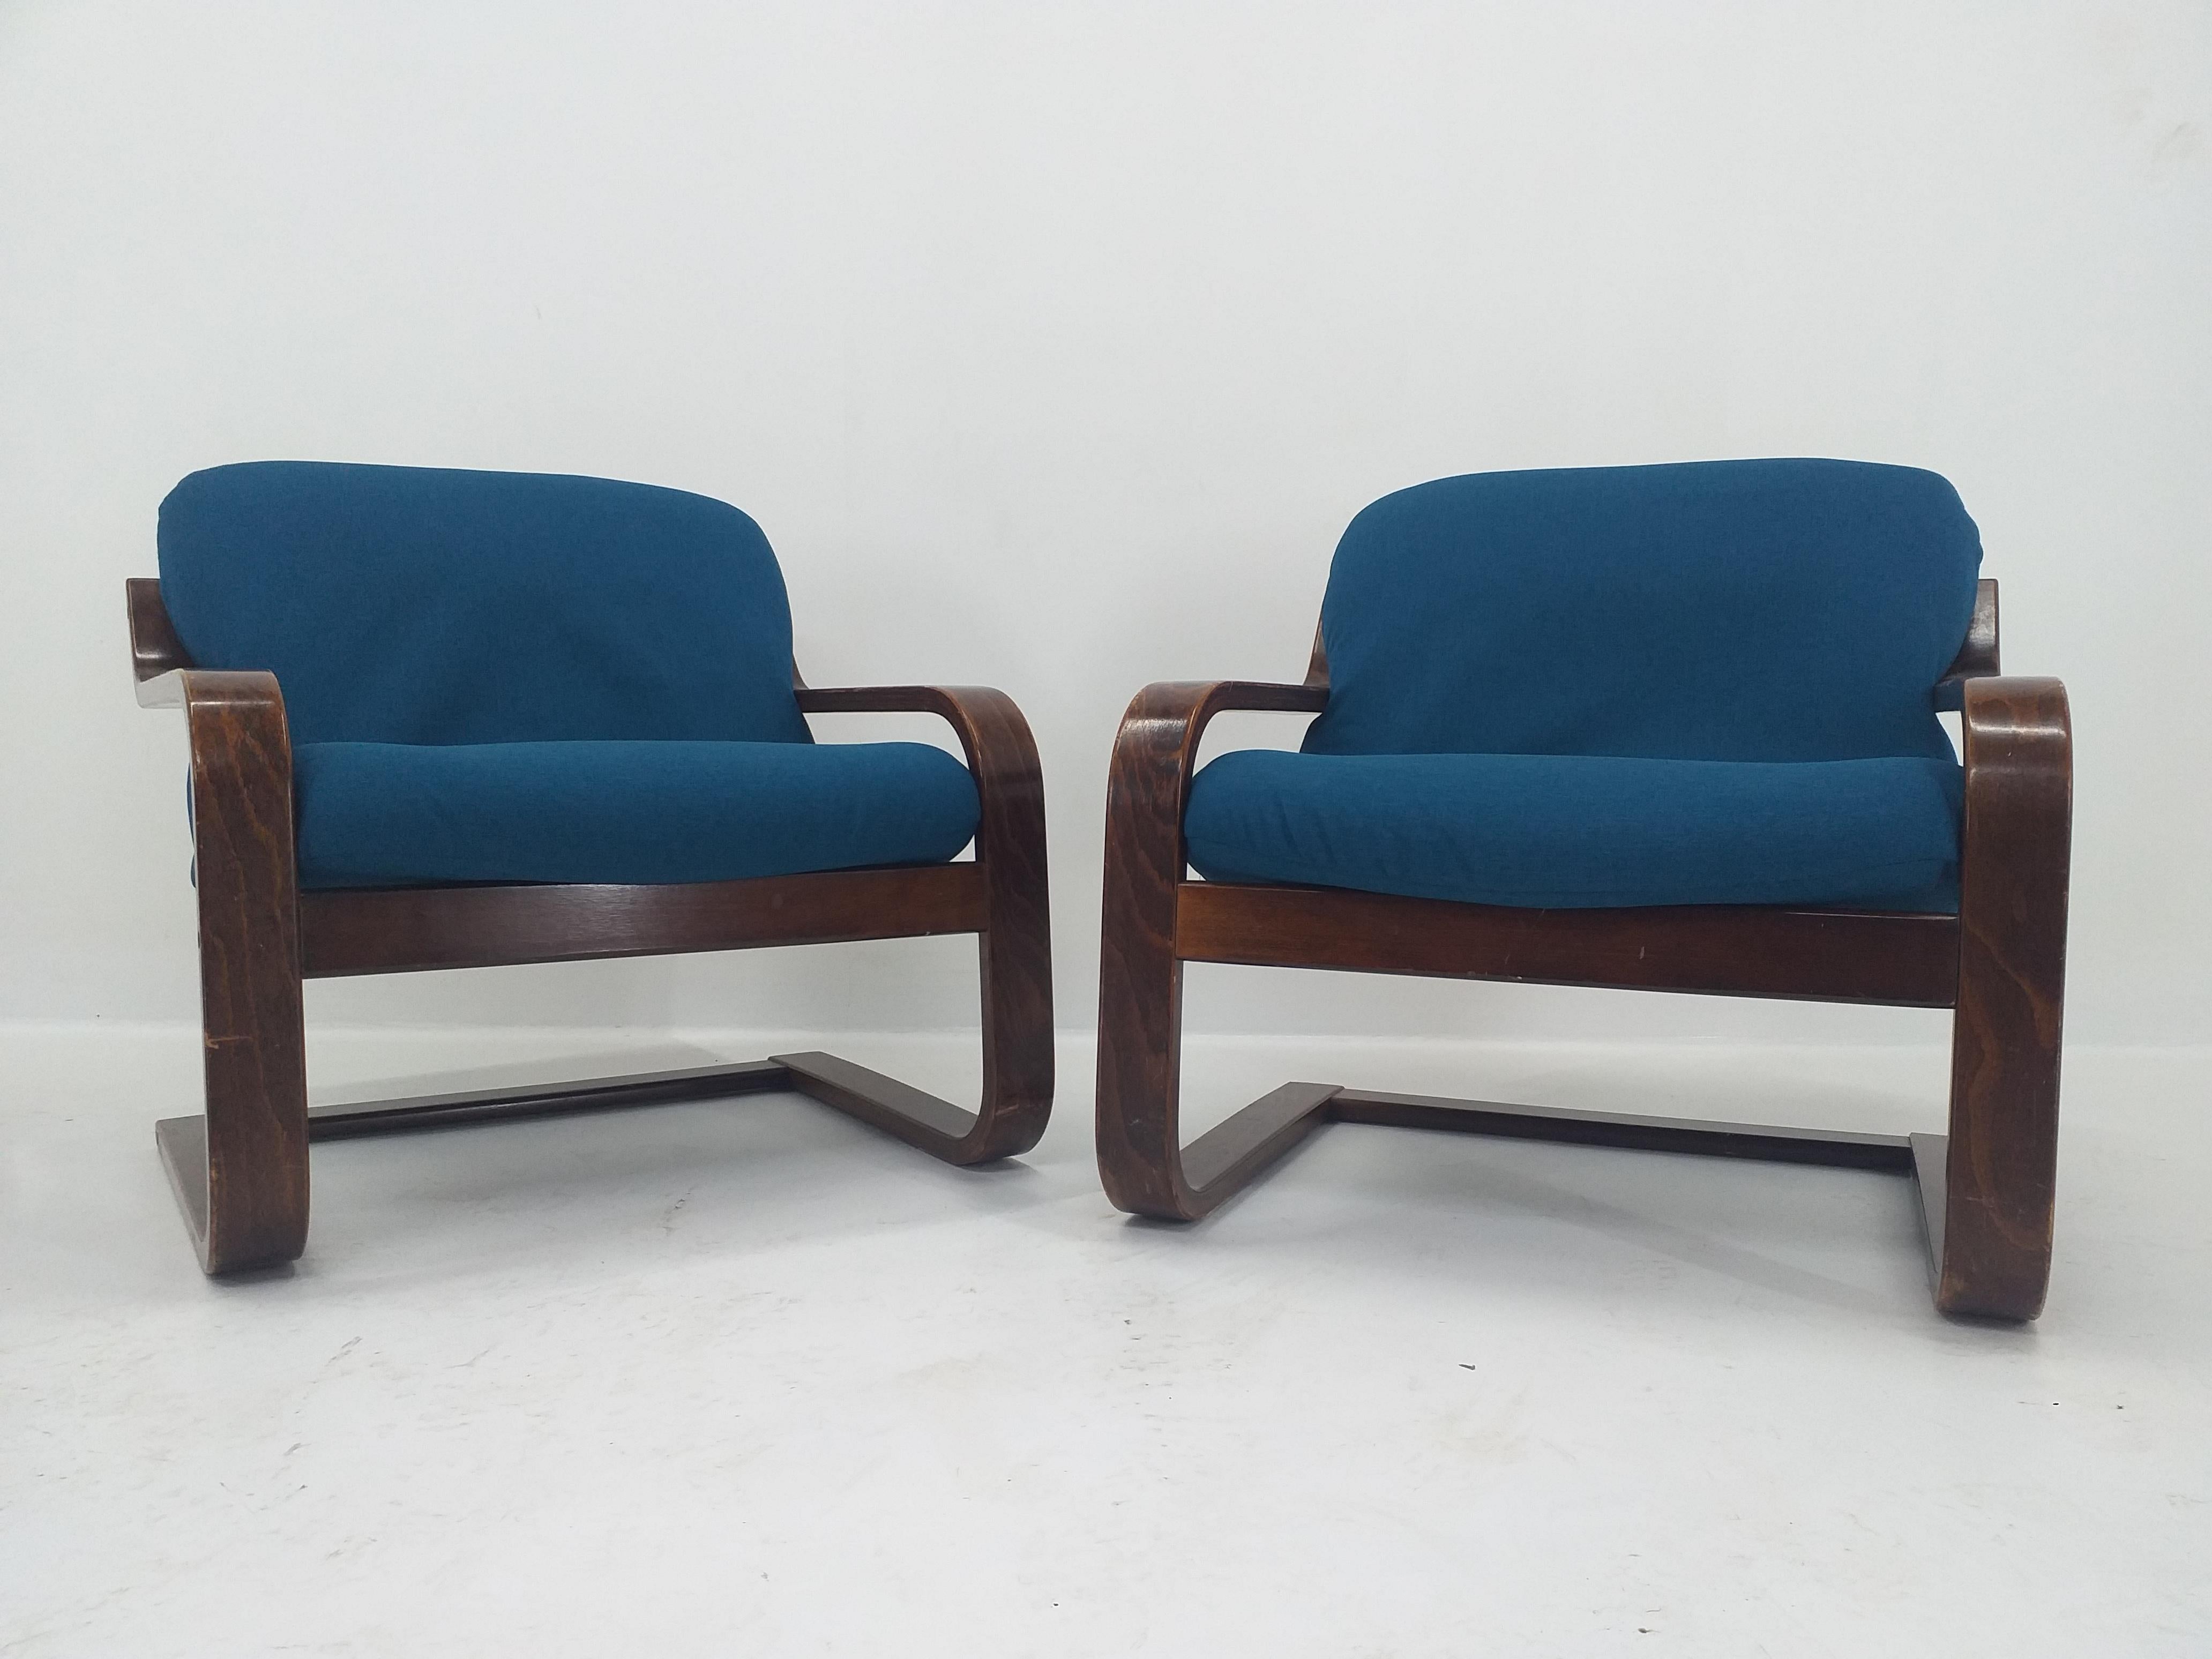 Fabric Pair of Midcentury Lounge Armchairs Westnofa, Norway, 1970s For Sale